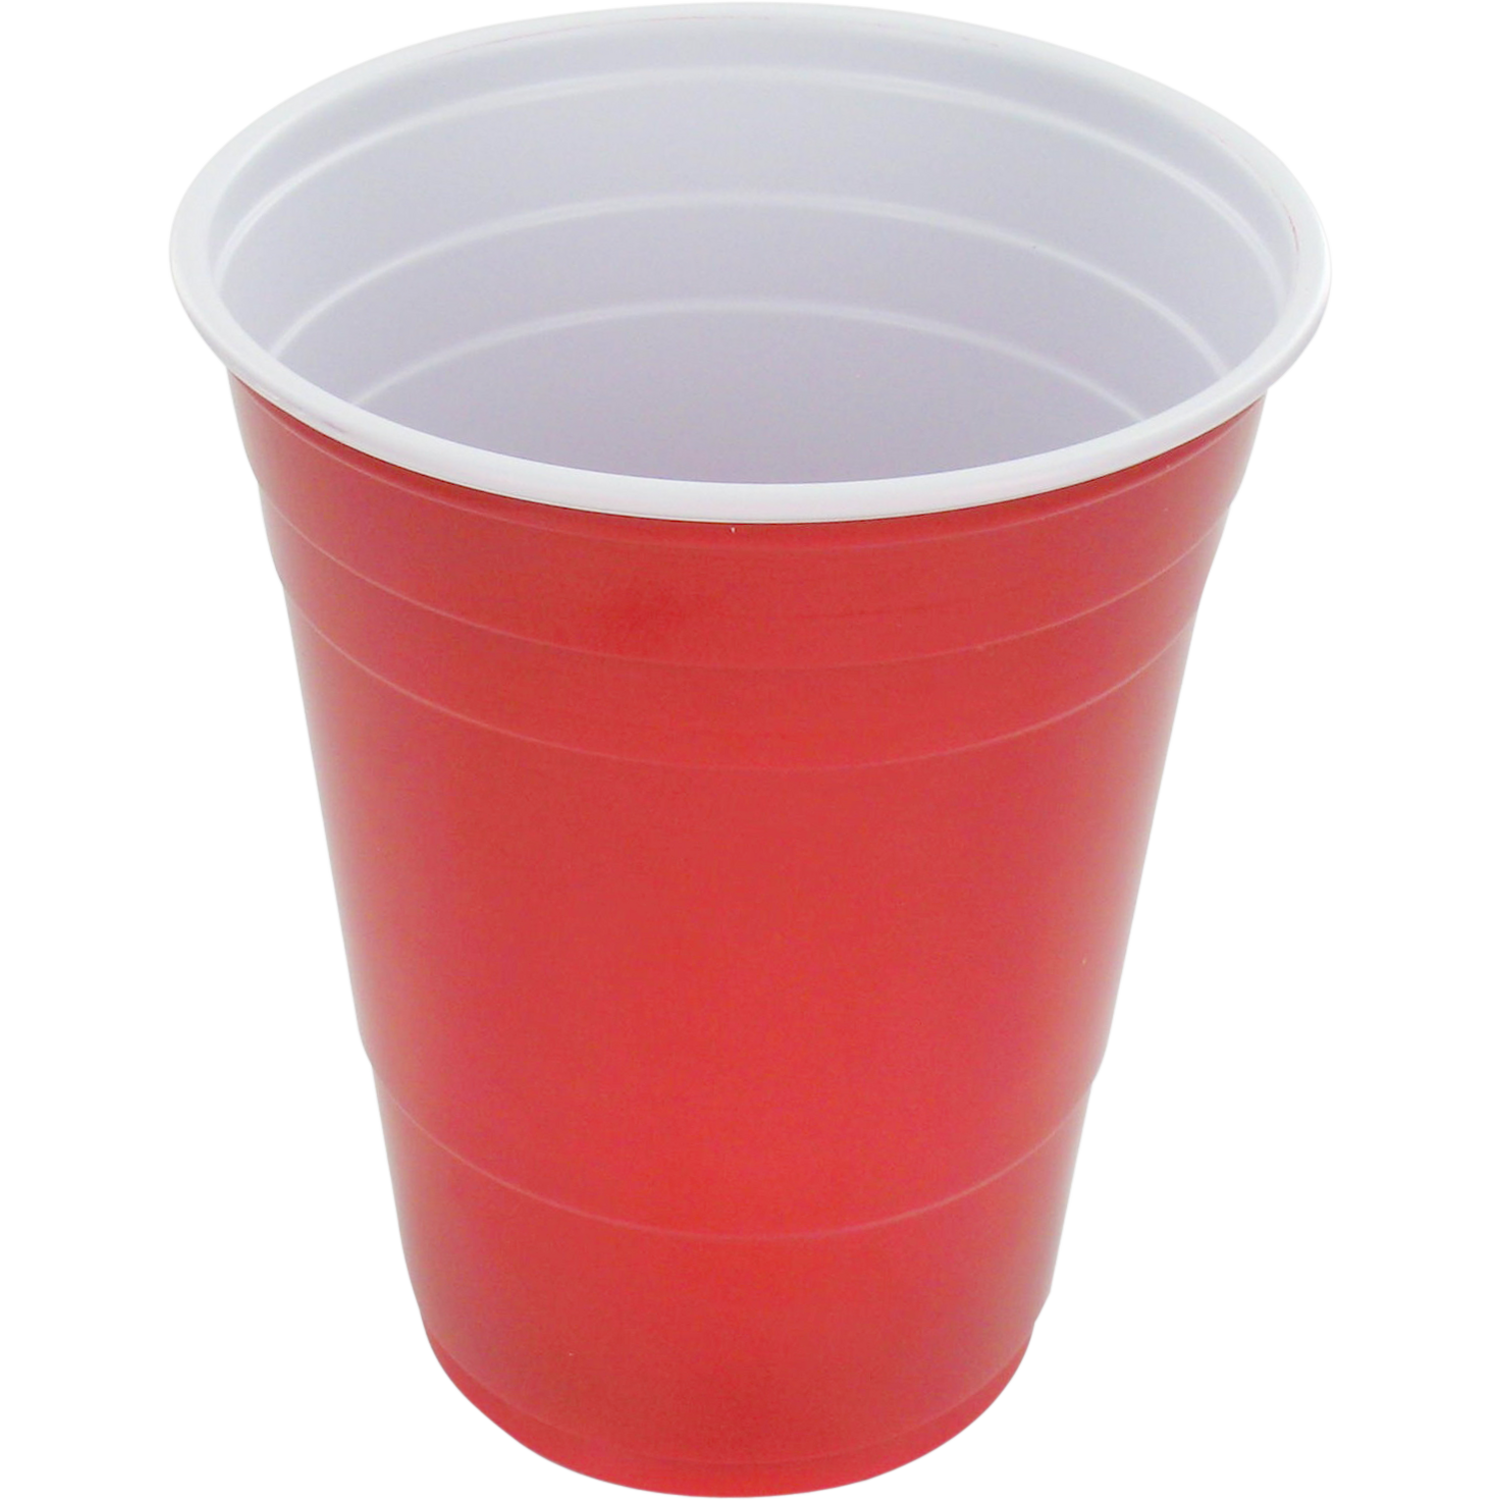  Partycup, PS, 300ml, 12oz, rood 1